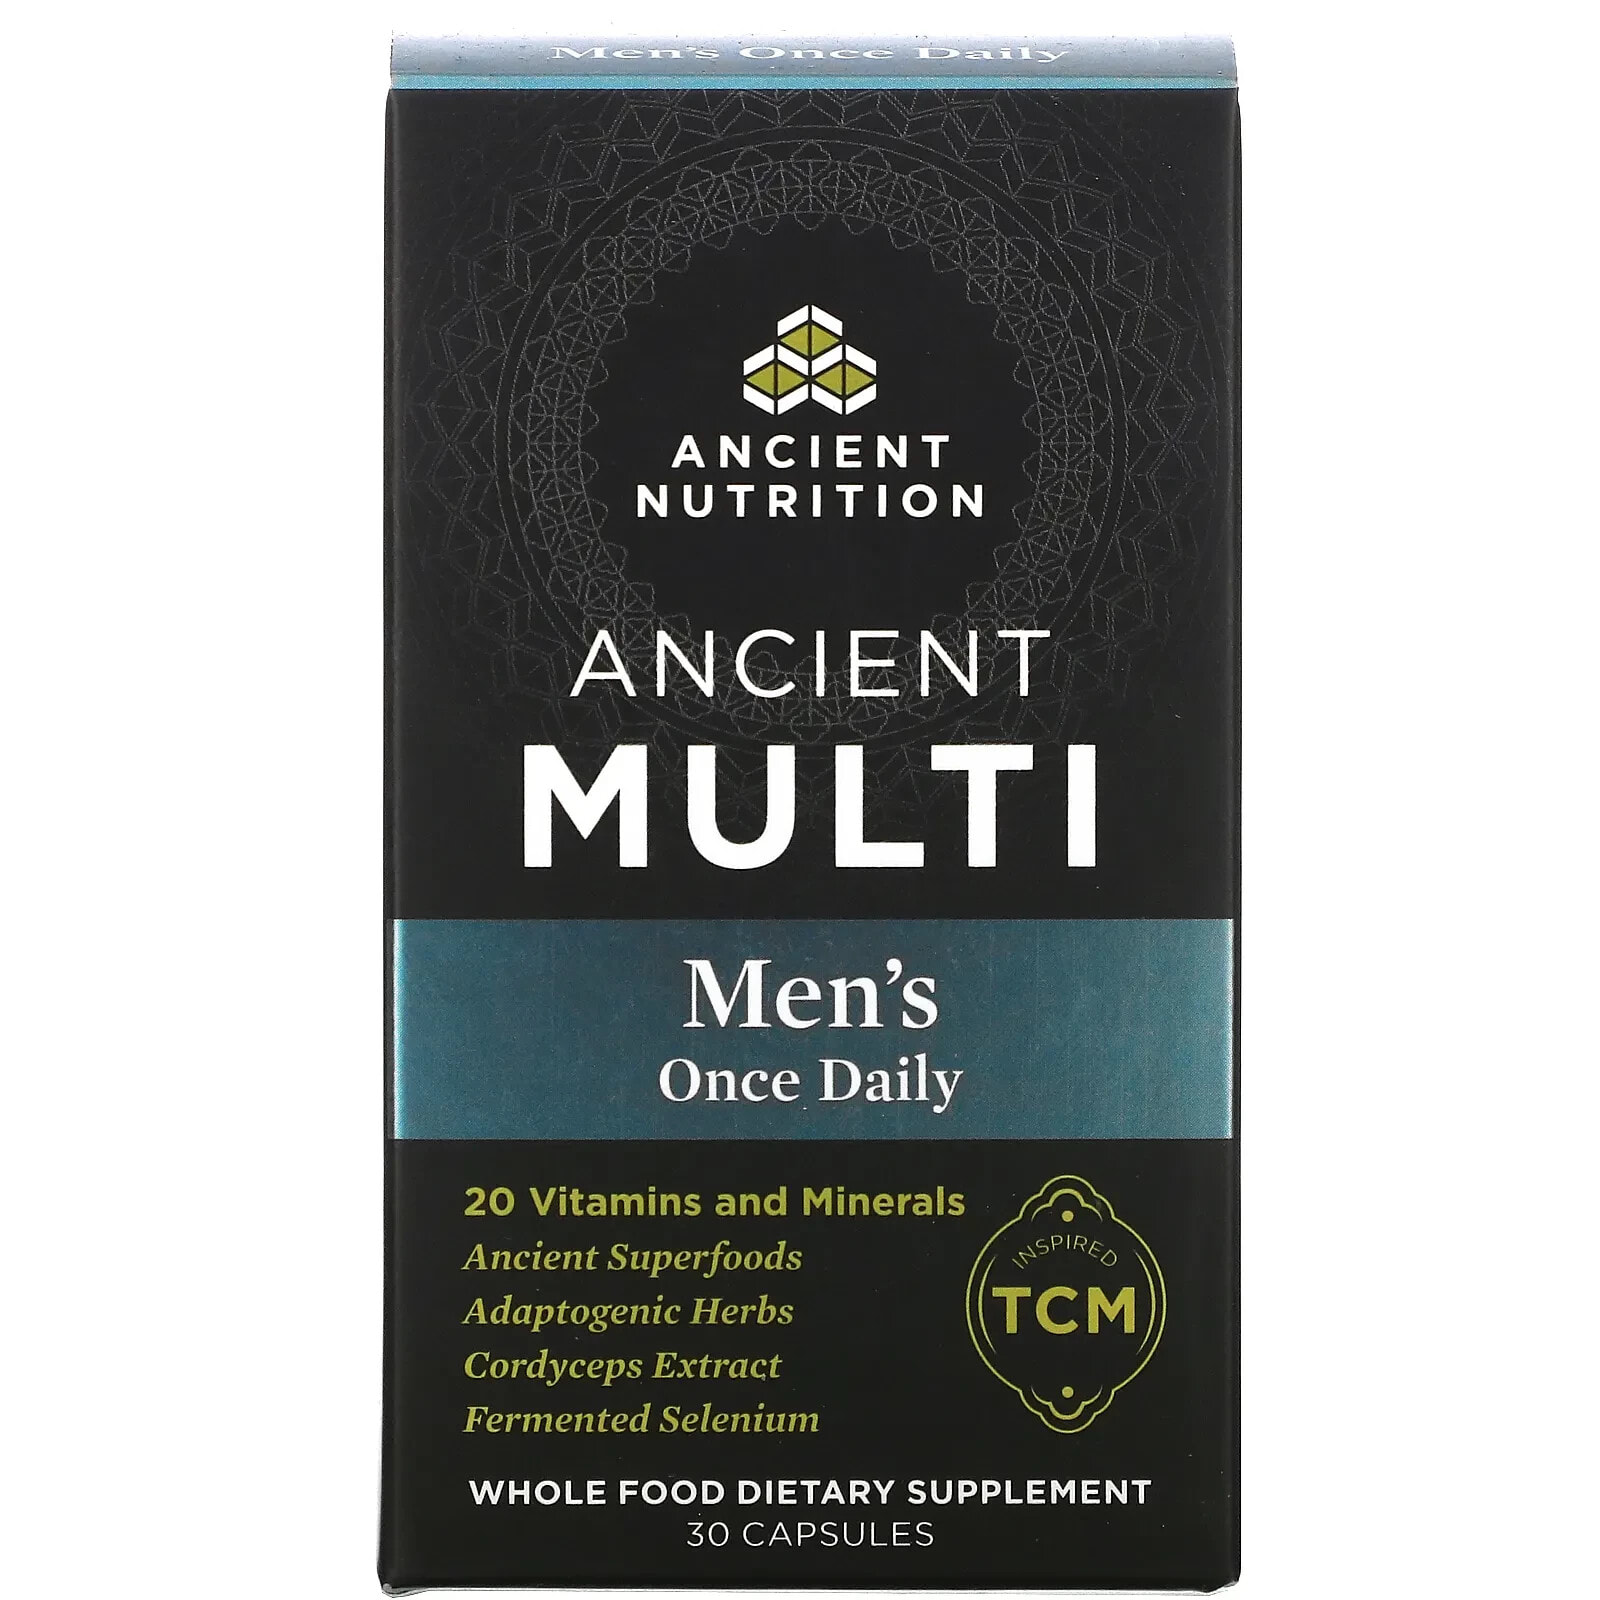 Dr. Axe / Ancient Nutrition, Ancient Multi, Men's One Daily, 30 Capsules (Discontinued Item)